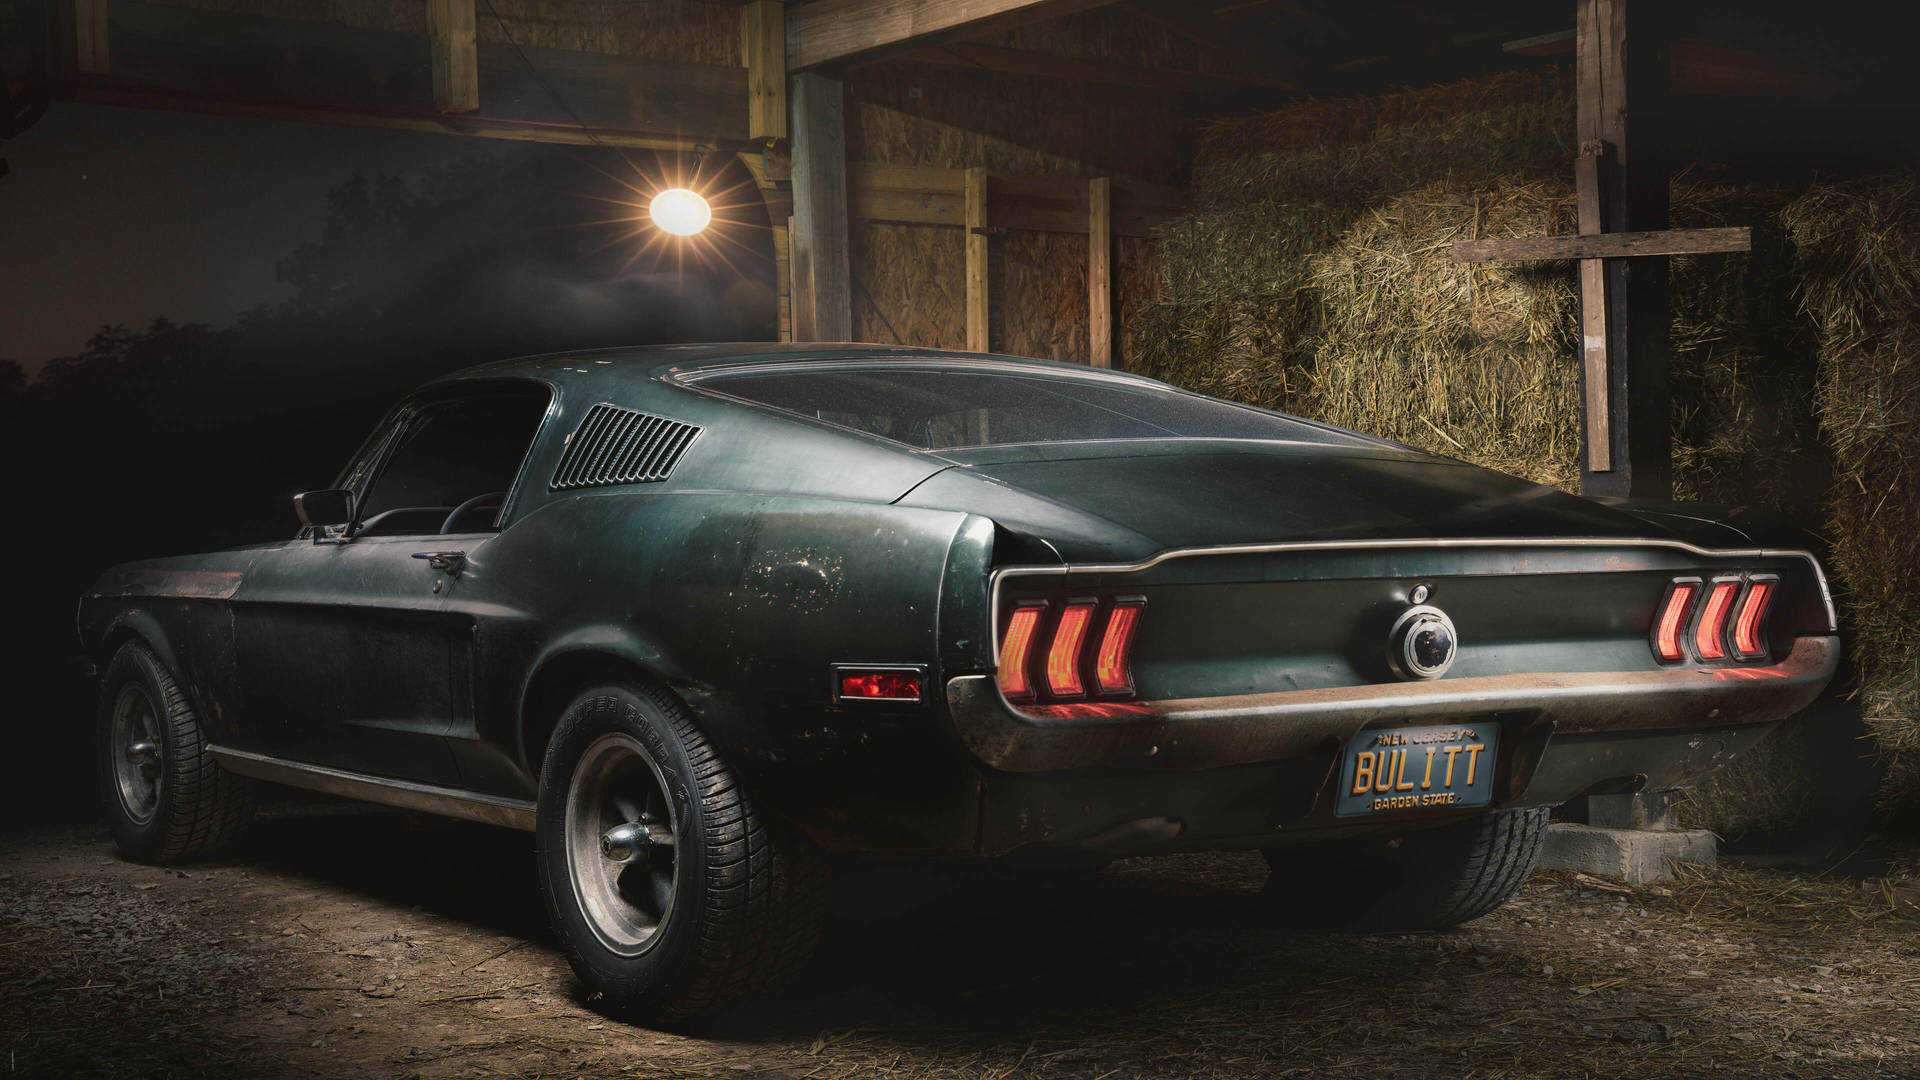 A Stunning 4K Ultra HD Picture of the Iconic Mustang Bullitt Wallpaper